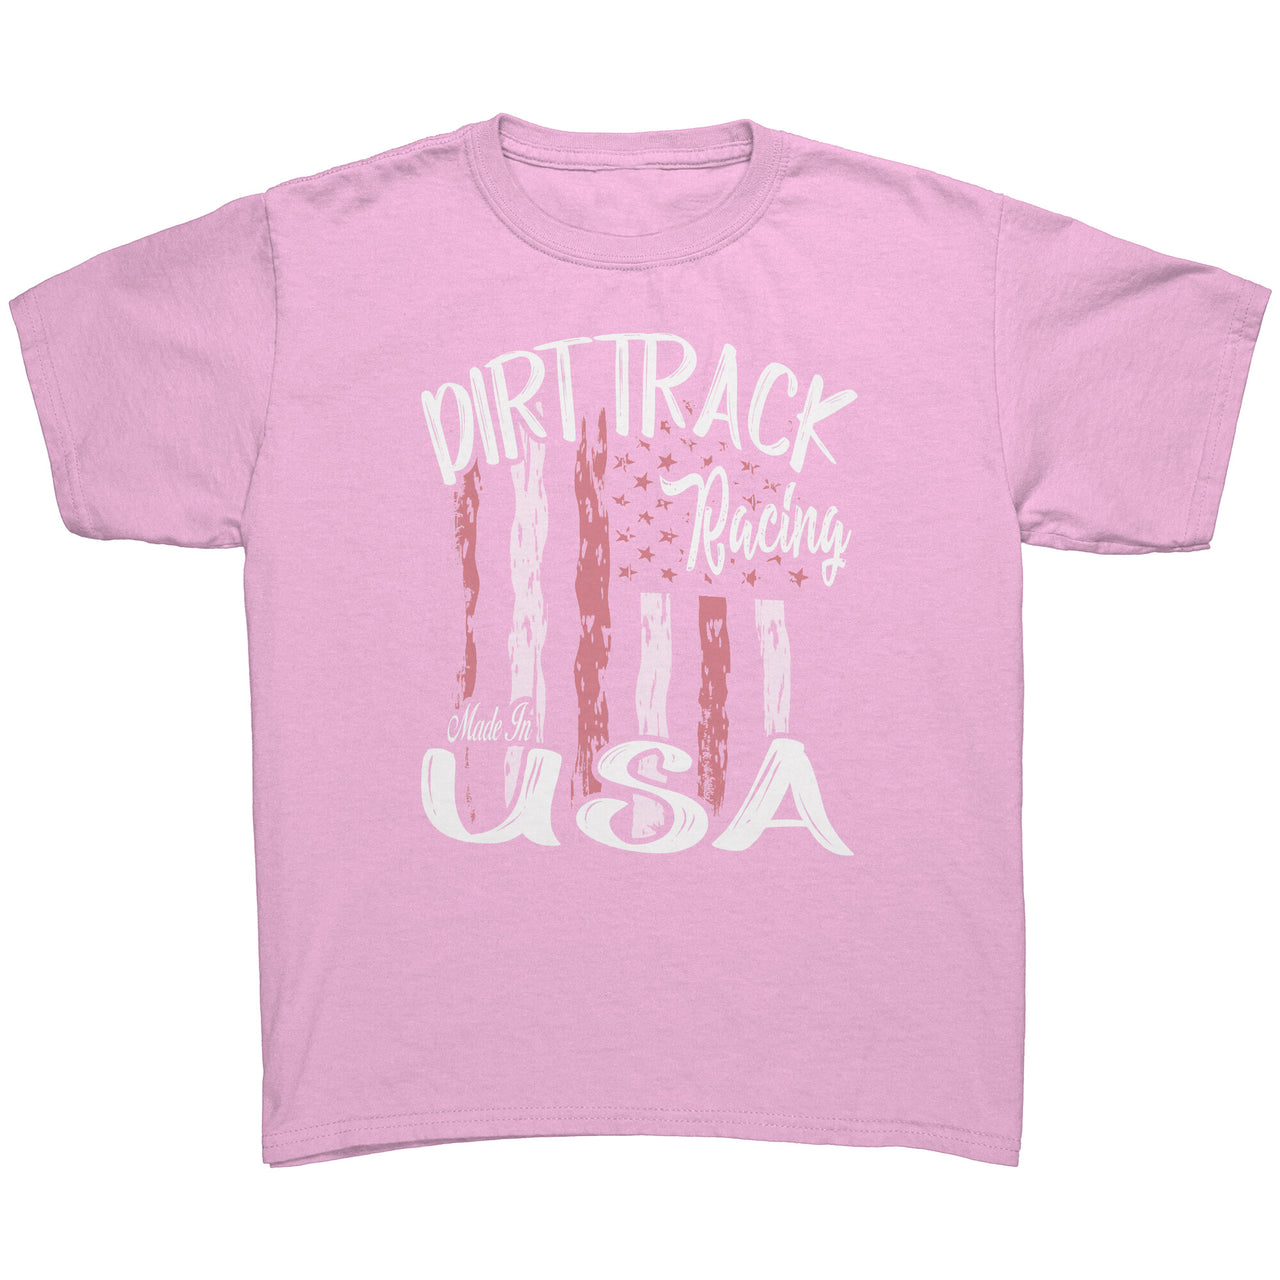 Dirt Track Racing Made in USA Youth t-Shirts/Hoodies